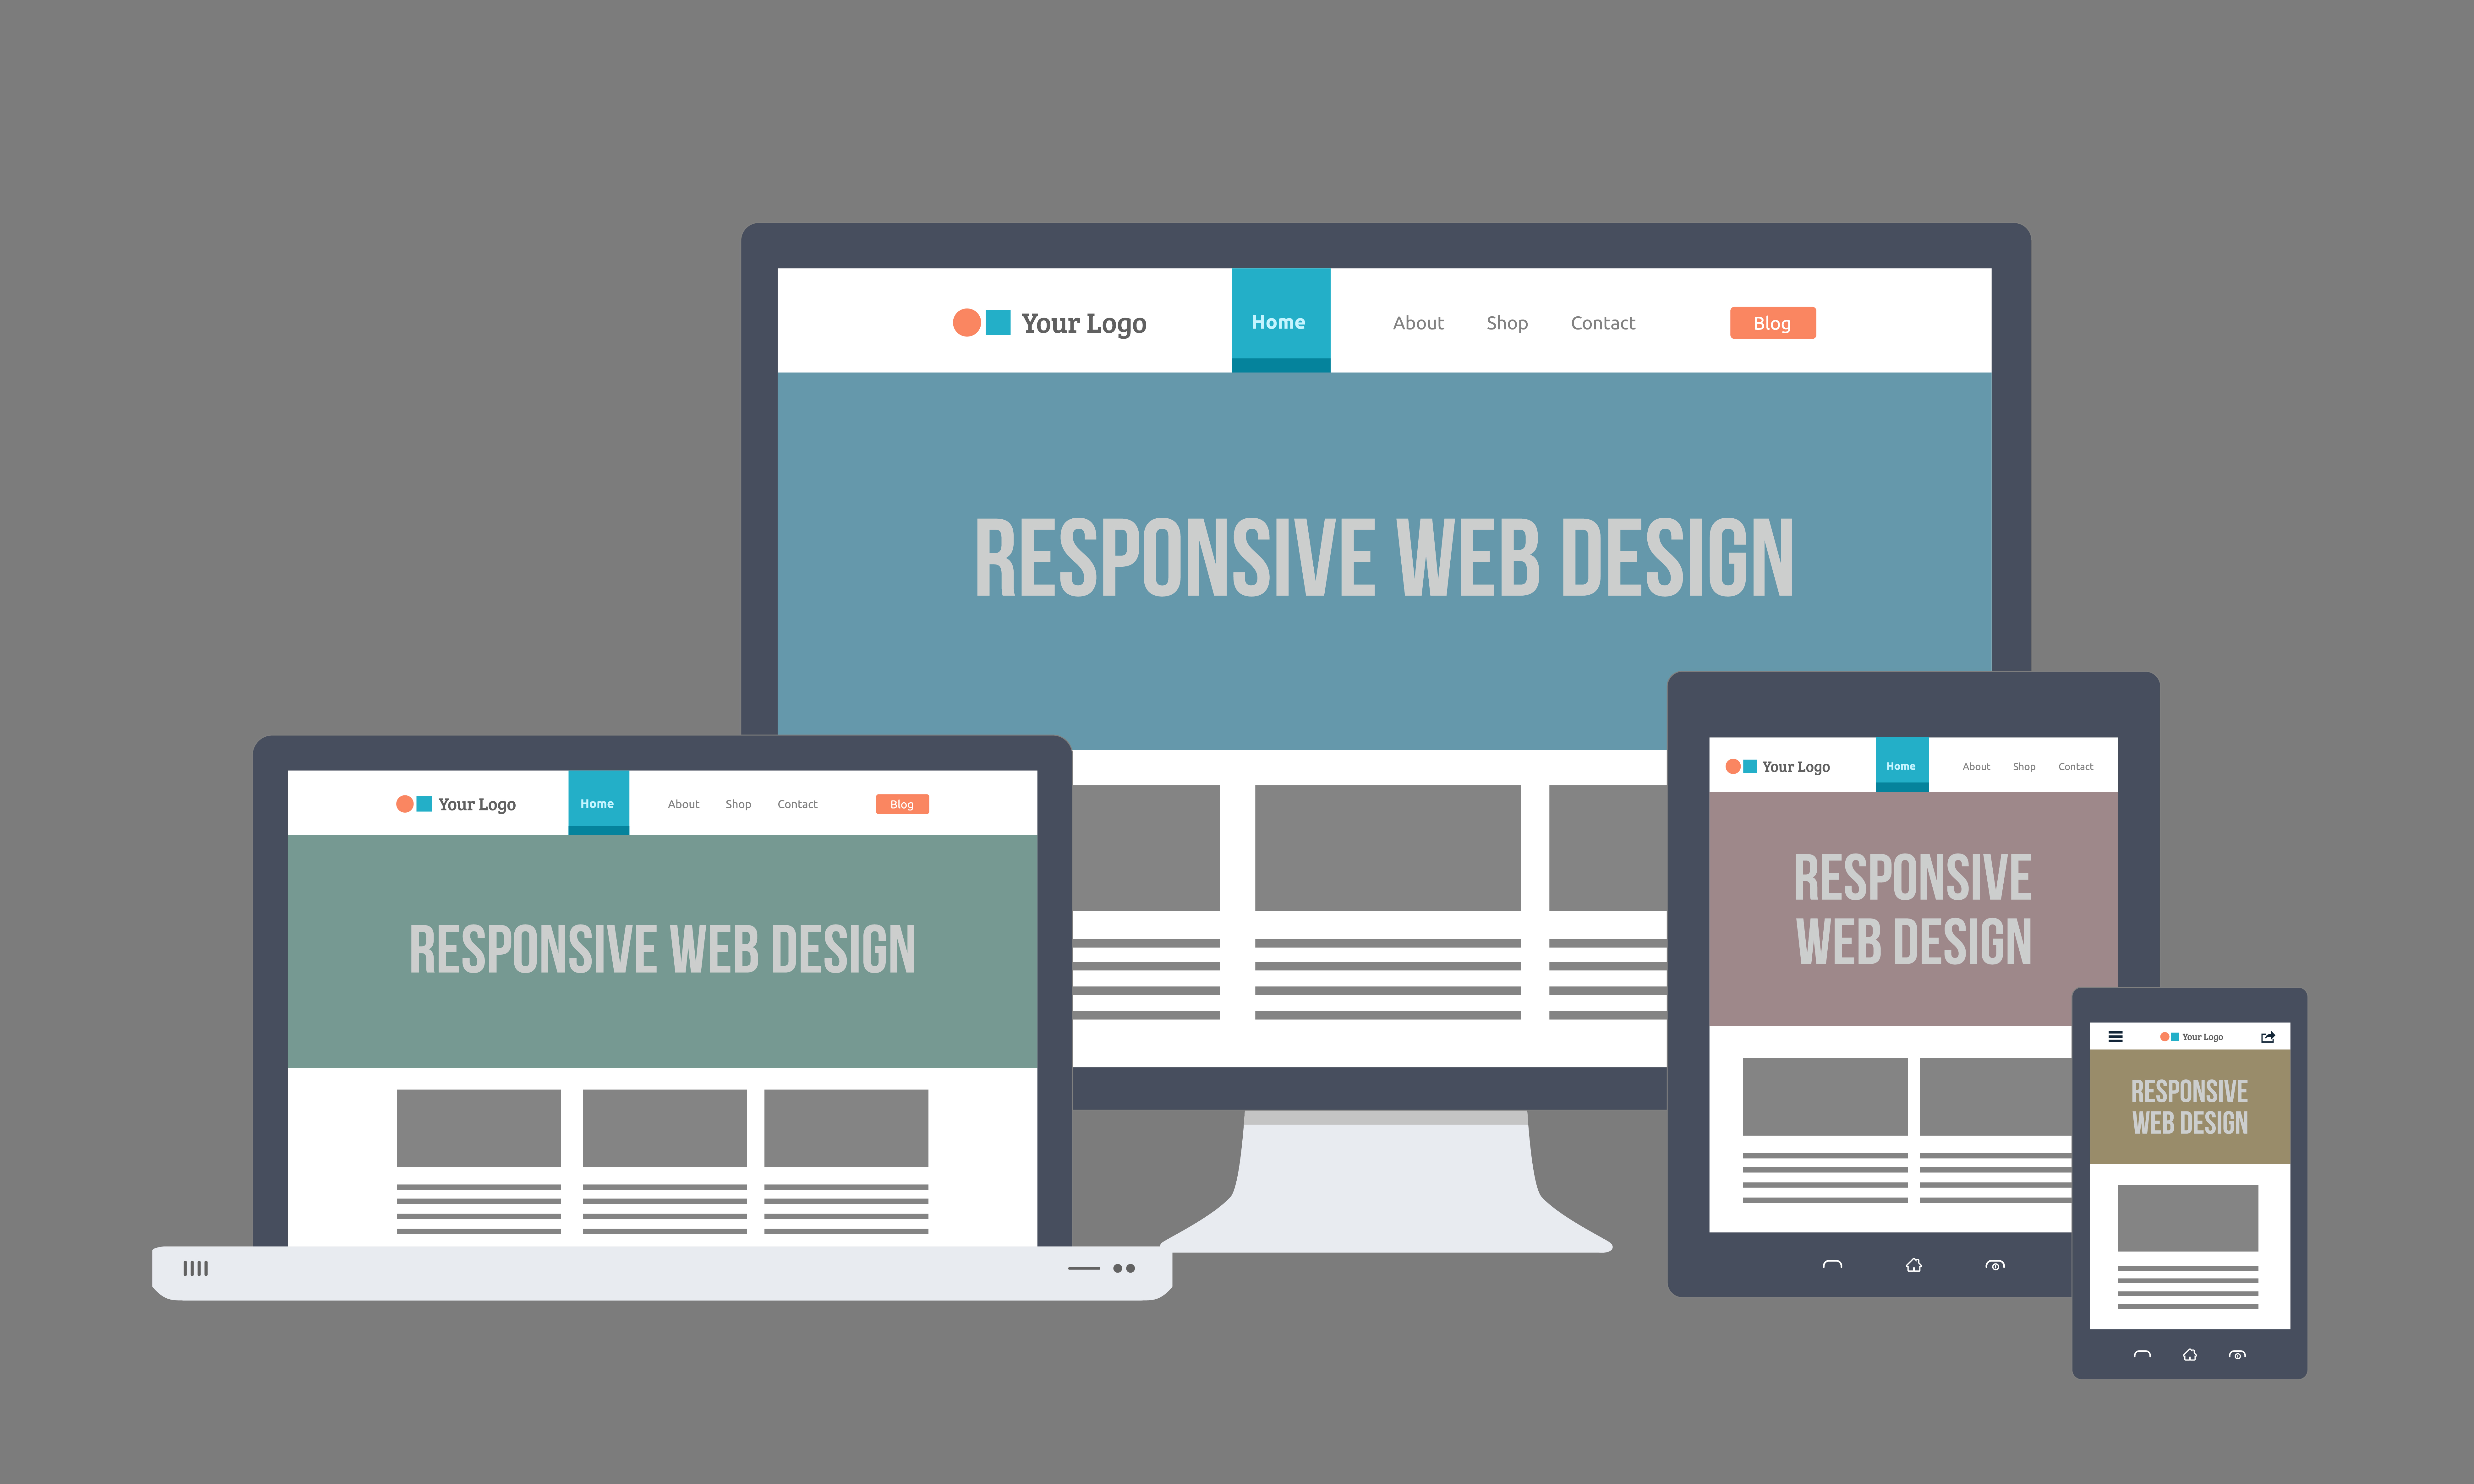 Why Responsive Web Design is now necessary